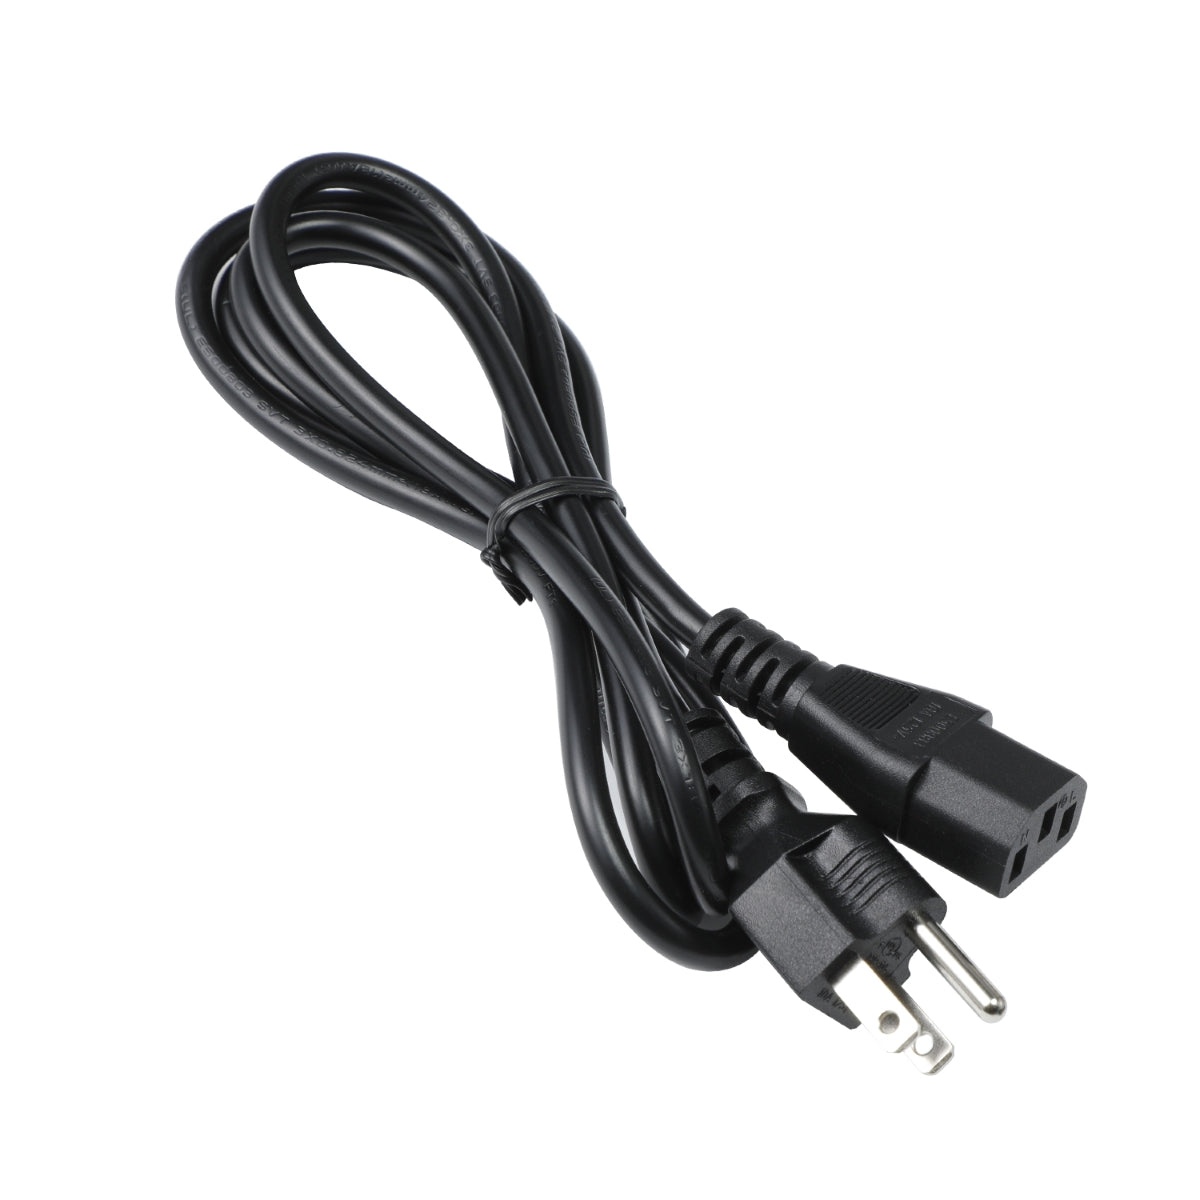 Power Cord for ViewSonic VP3481a Monitor